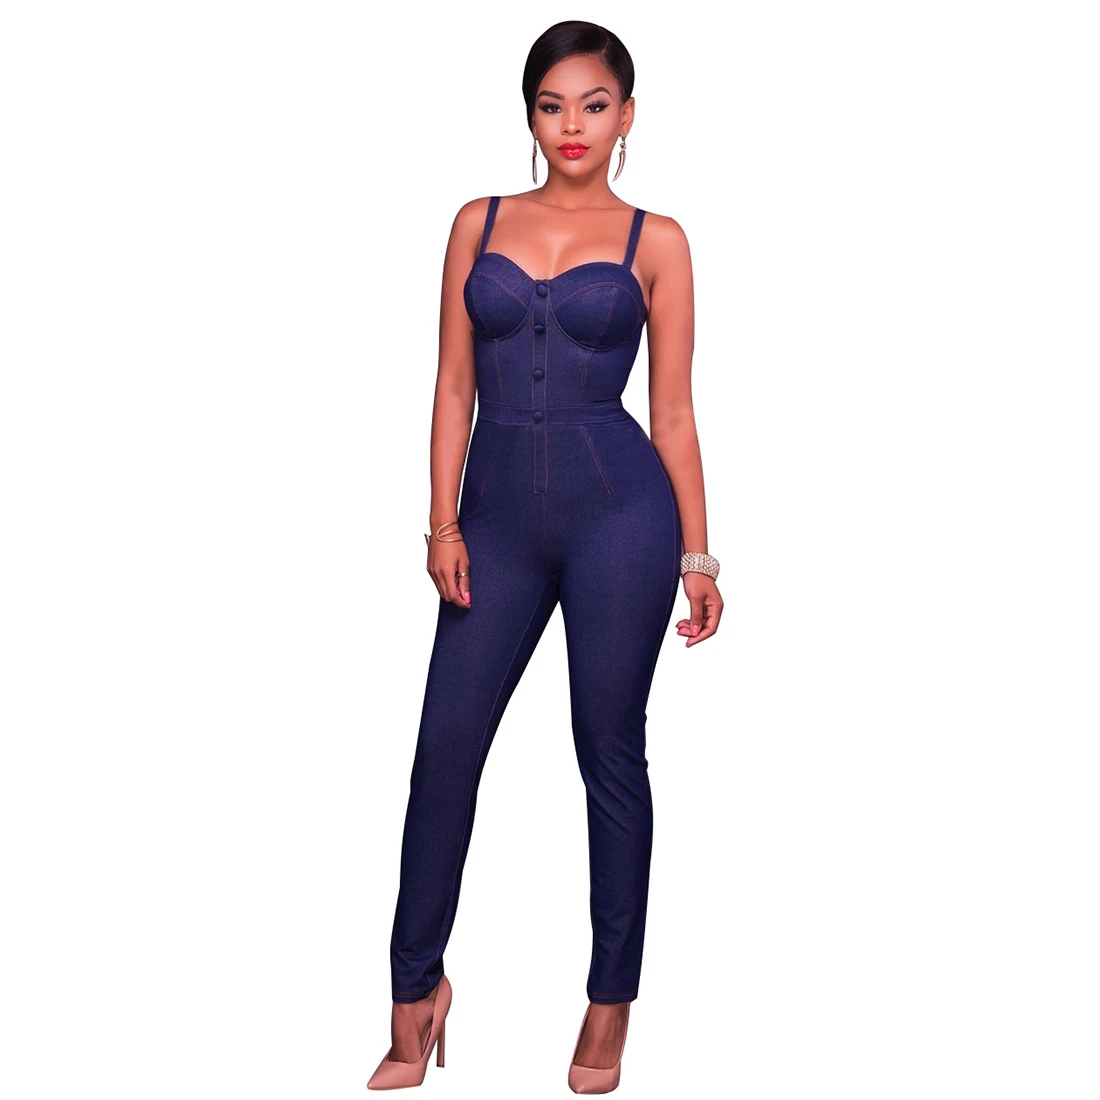 YJSFG HOUSE Fashion Women Bodycon Jumpsuit Rompers Sexy Sleeveless